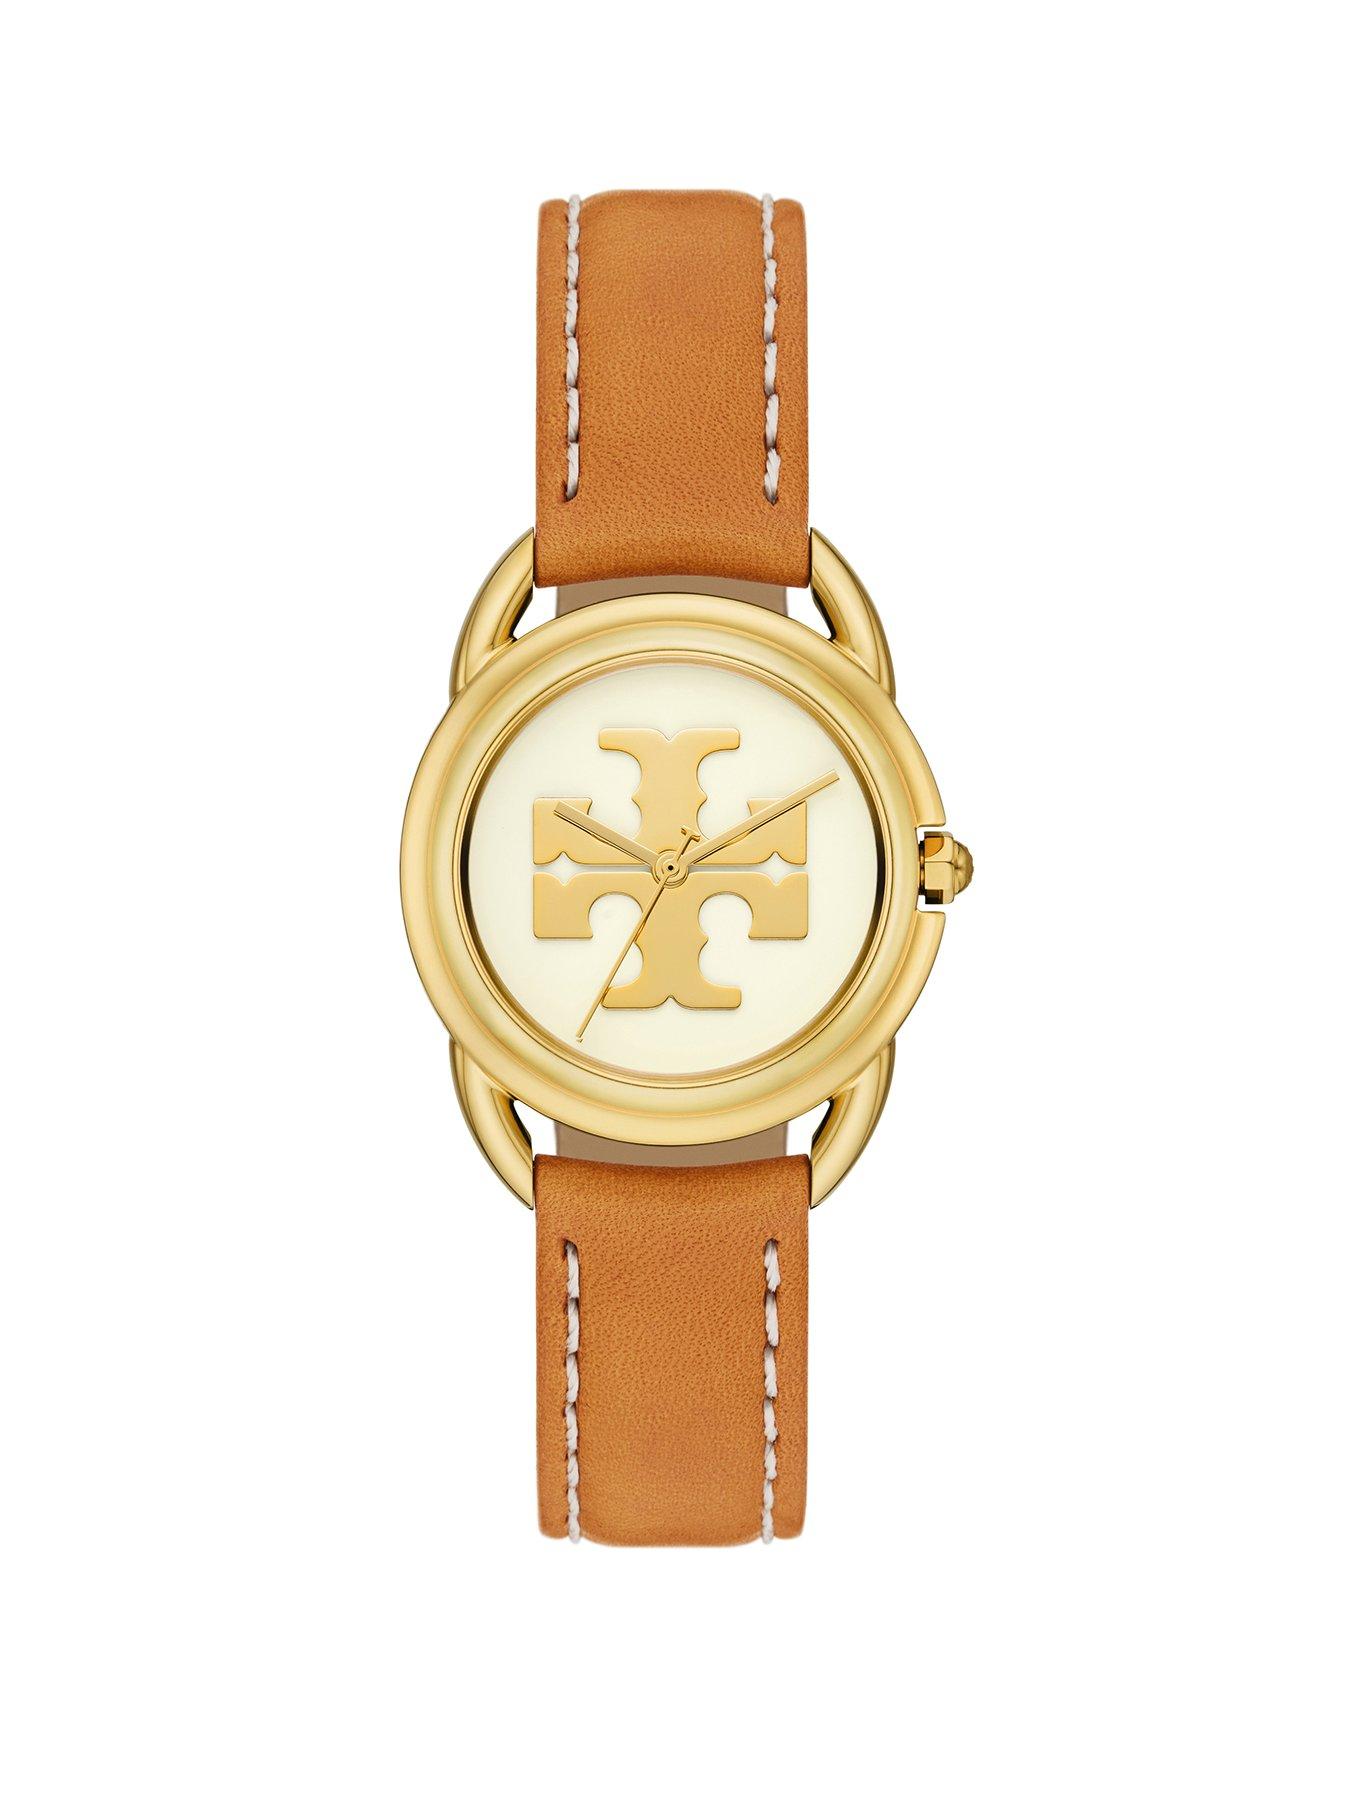 Tory Burch The Miller Square Brown Leather Strap Watch | Very.co.uk